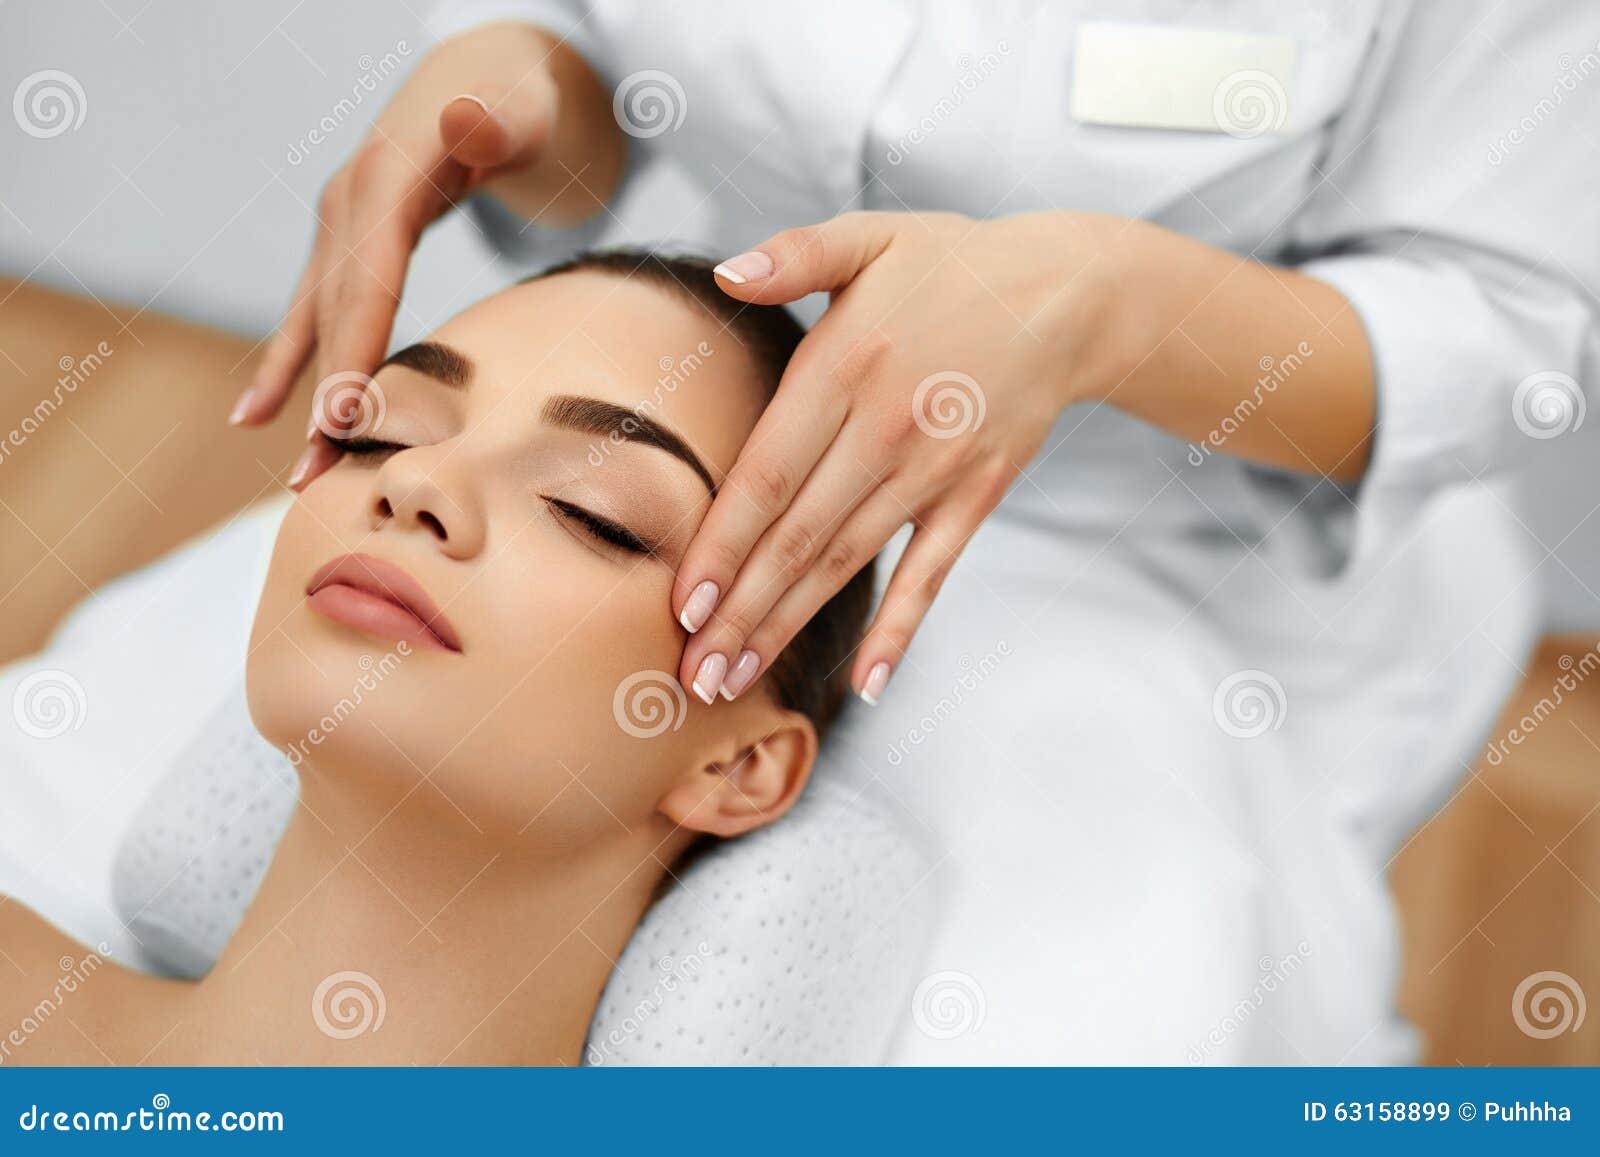 Skin Body Care Woman Getting Beauty Spa Face Massage Treatment